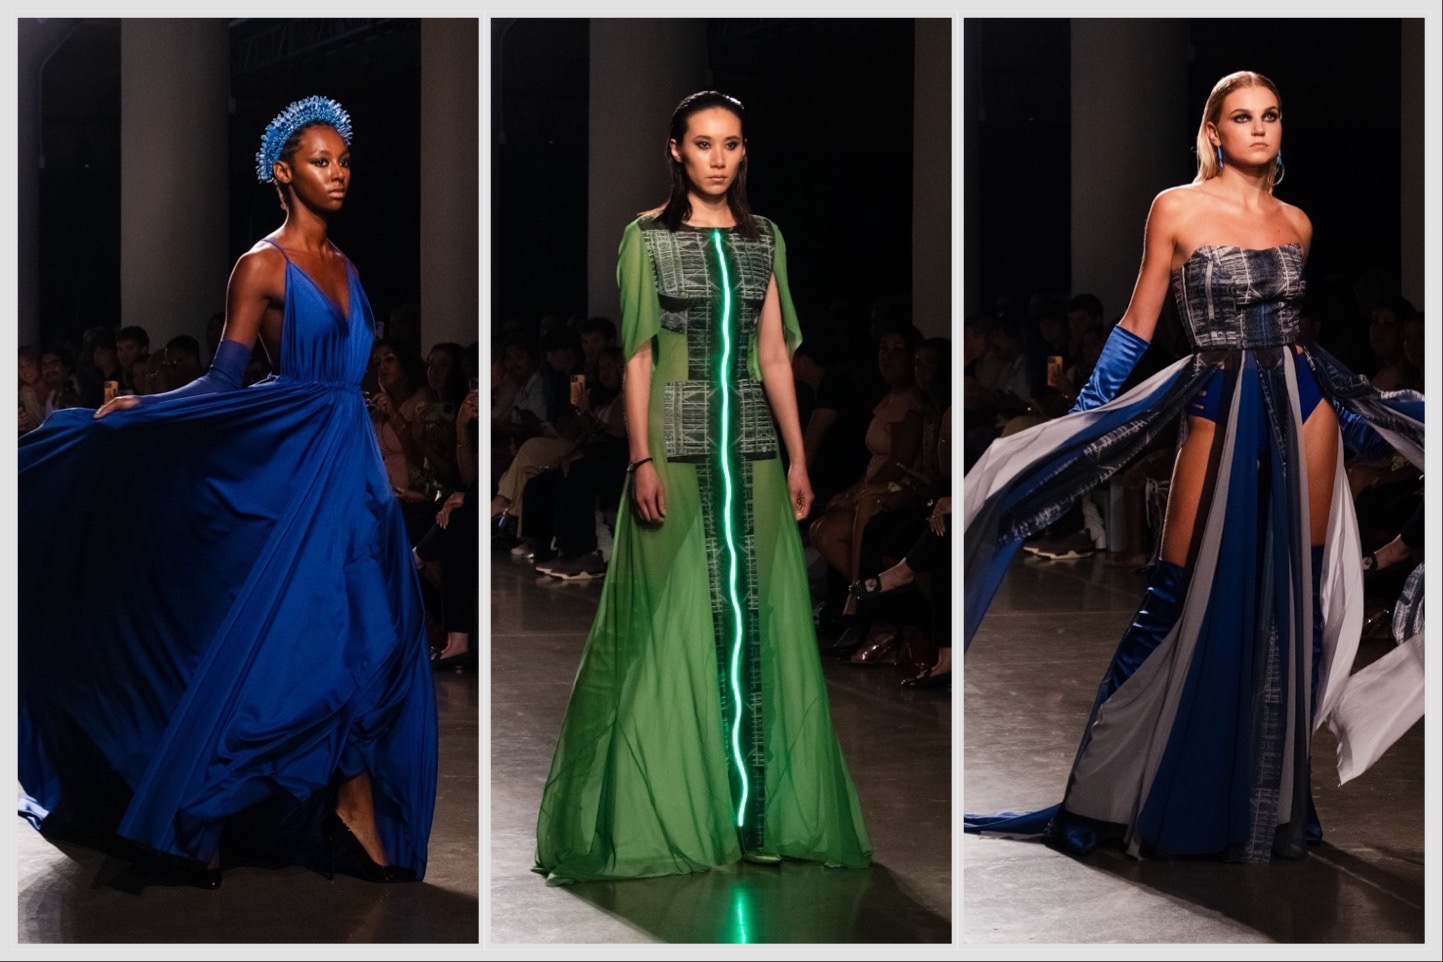 A collage of three images from left to right: a model wearing a blue headdress and dress; a model wearing a neon green dress; a model wearing a gray-and-blue slitted skirt.